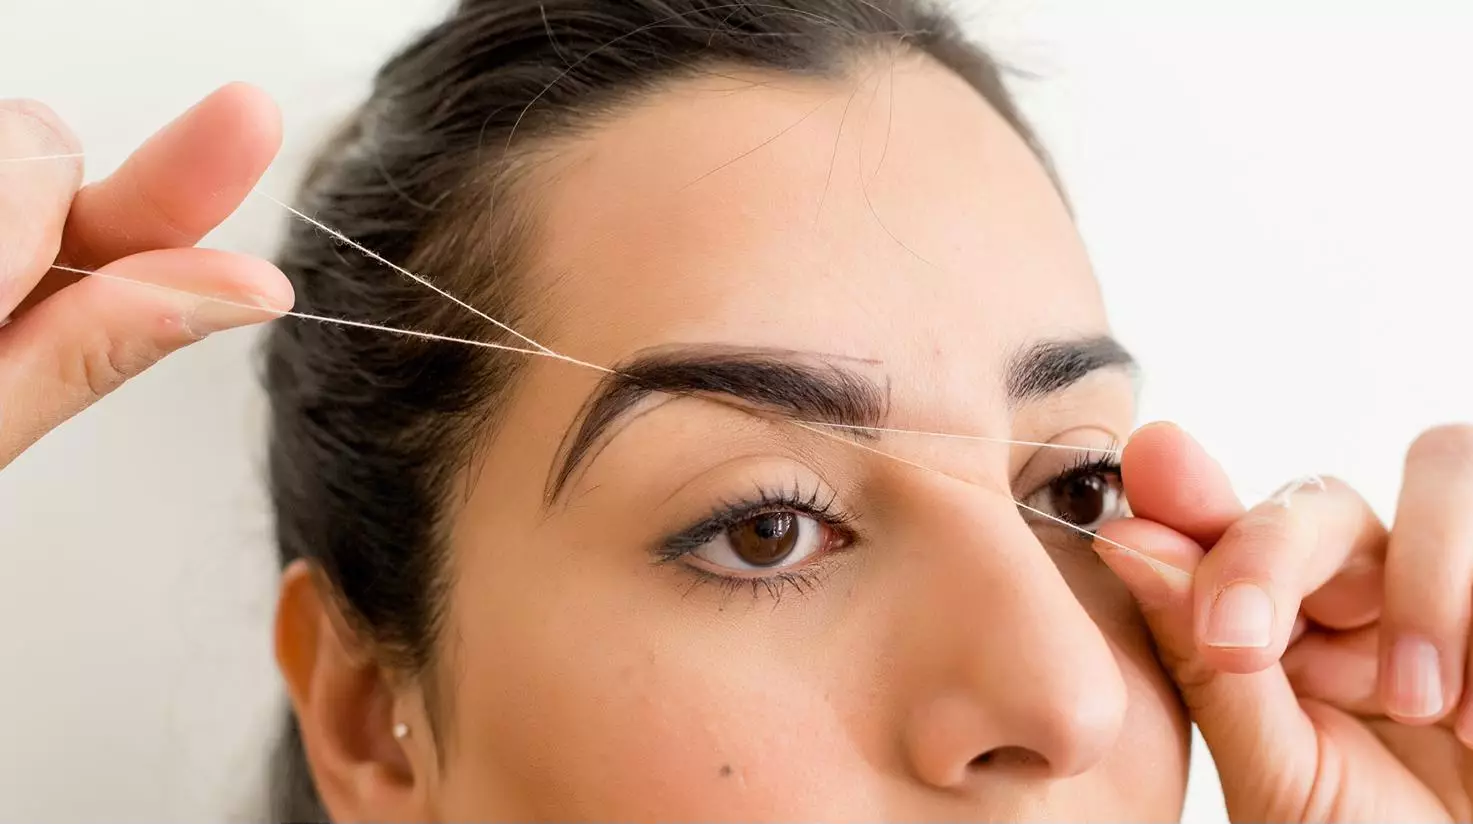 A Step-By-Step Guide To Threading Your Eyebrows At Home